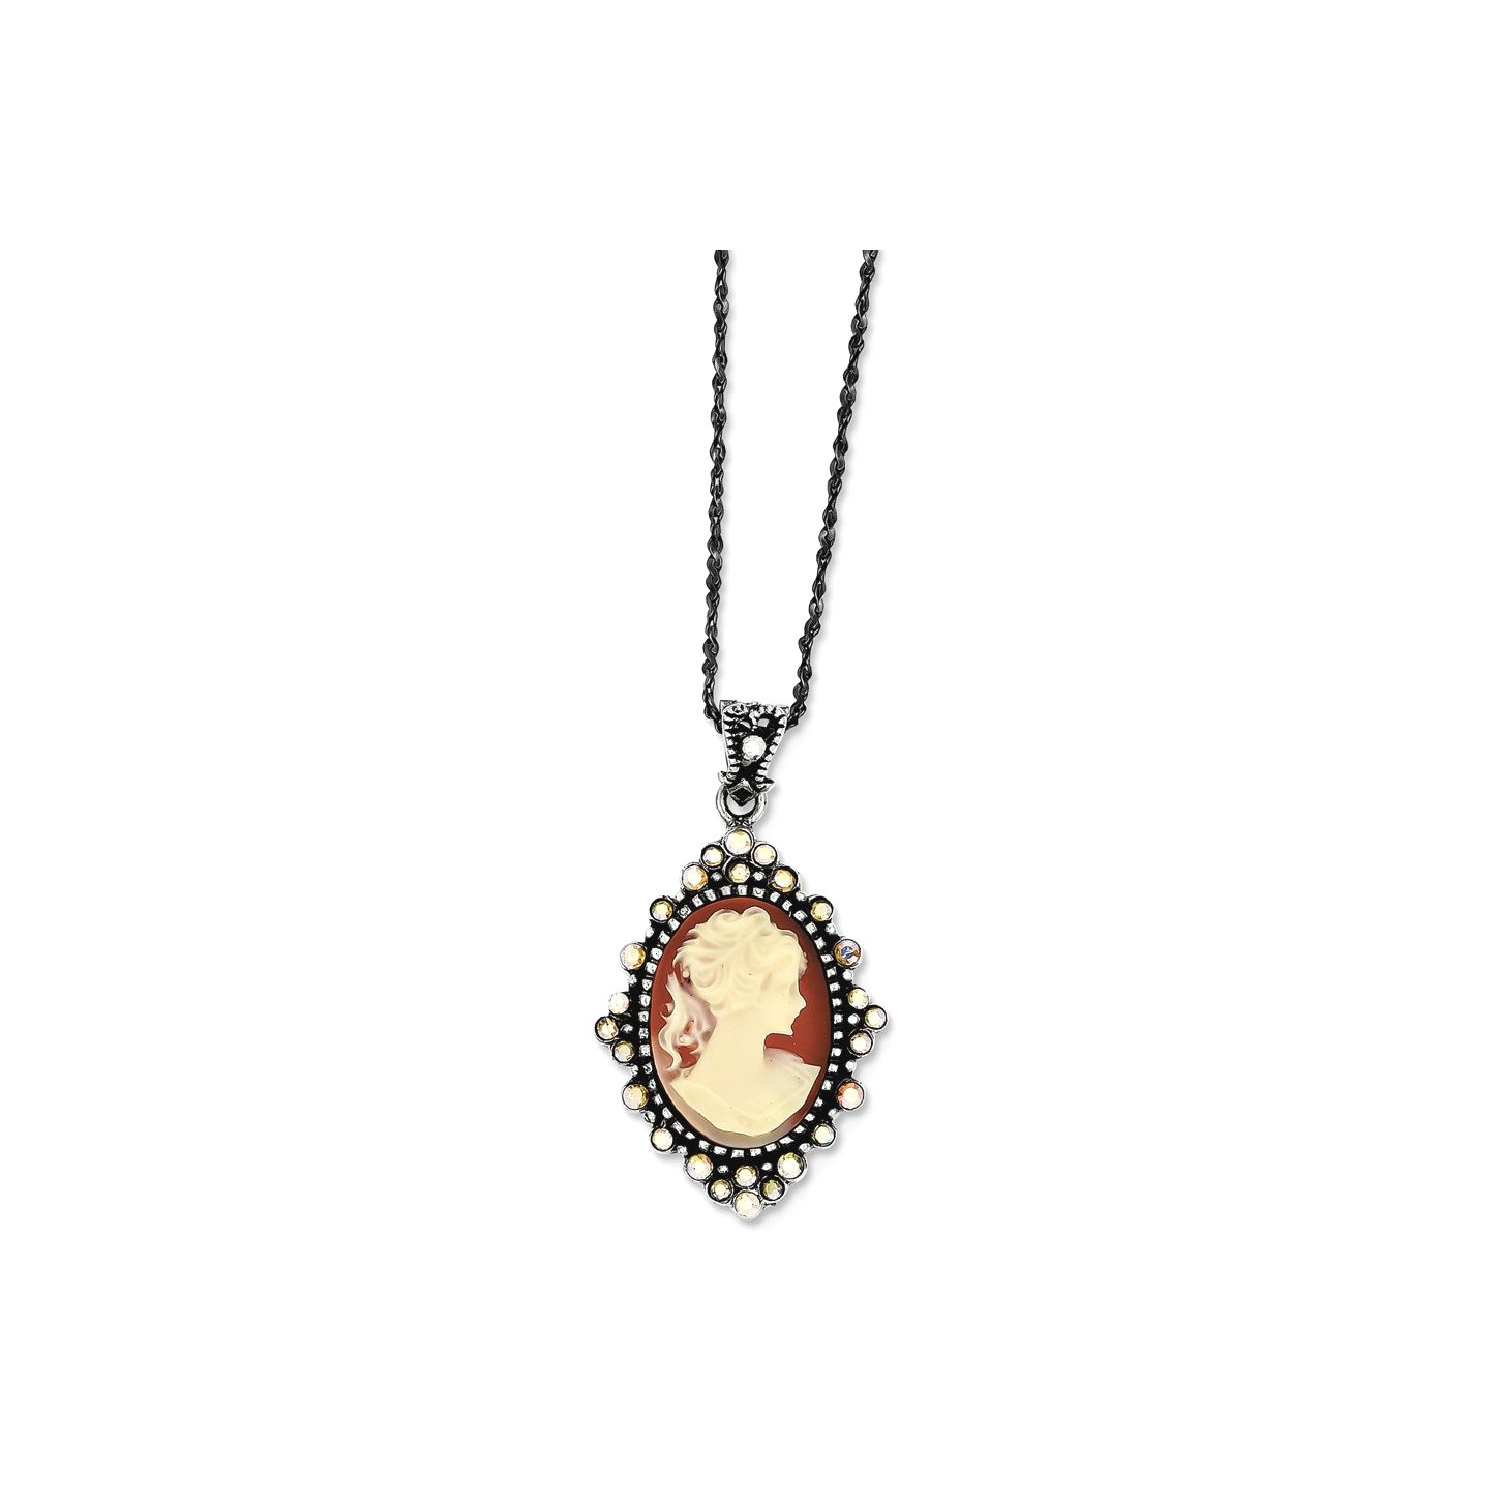 IceCarats 925 Sterling Silver Resin Cameo Crystal Pendant On 16 Inch Chain Necklace